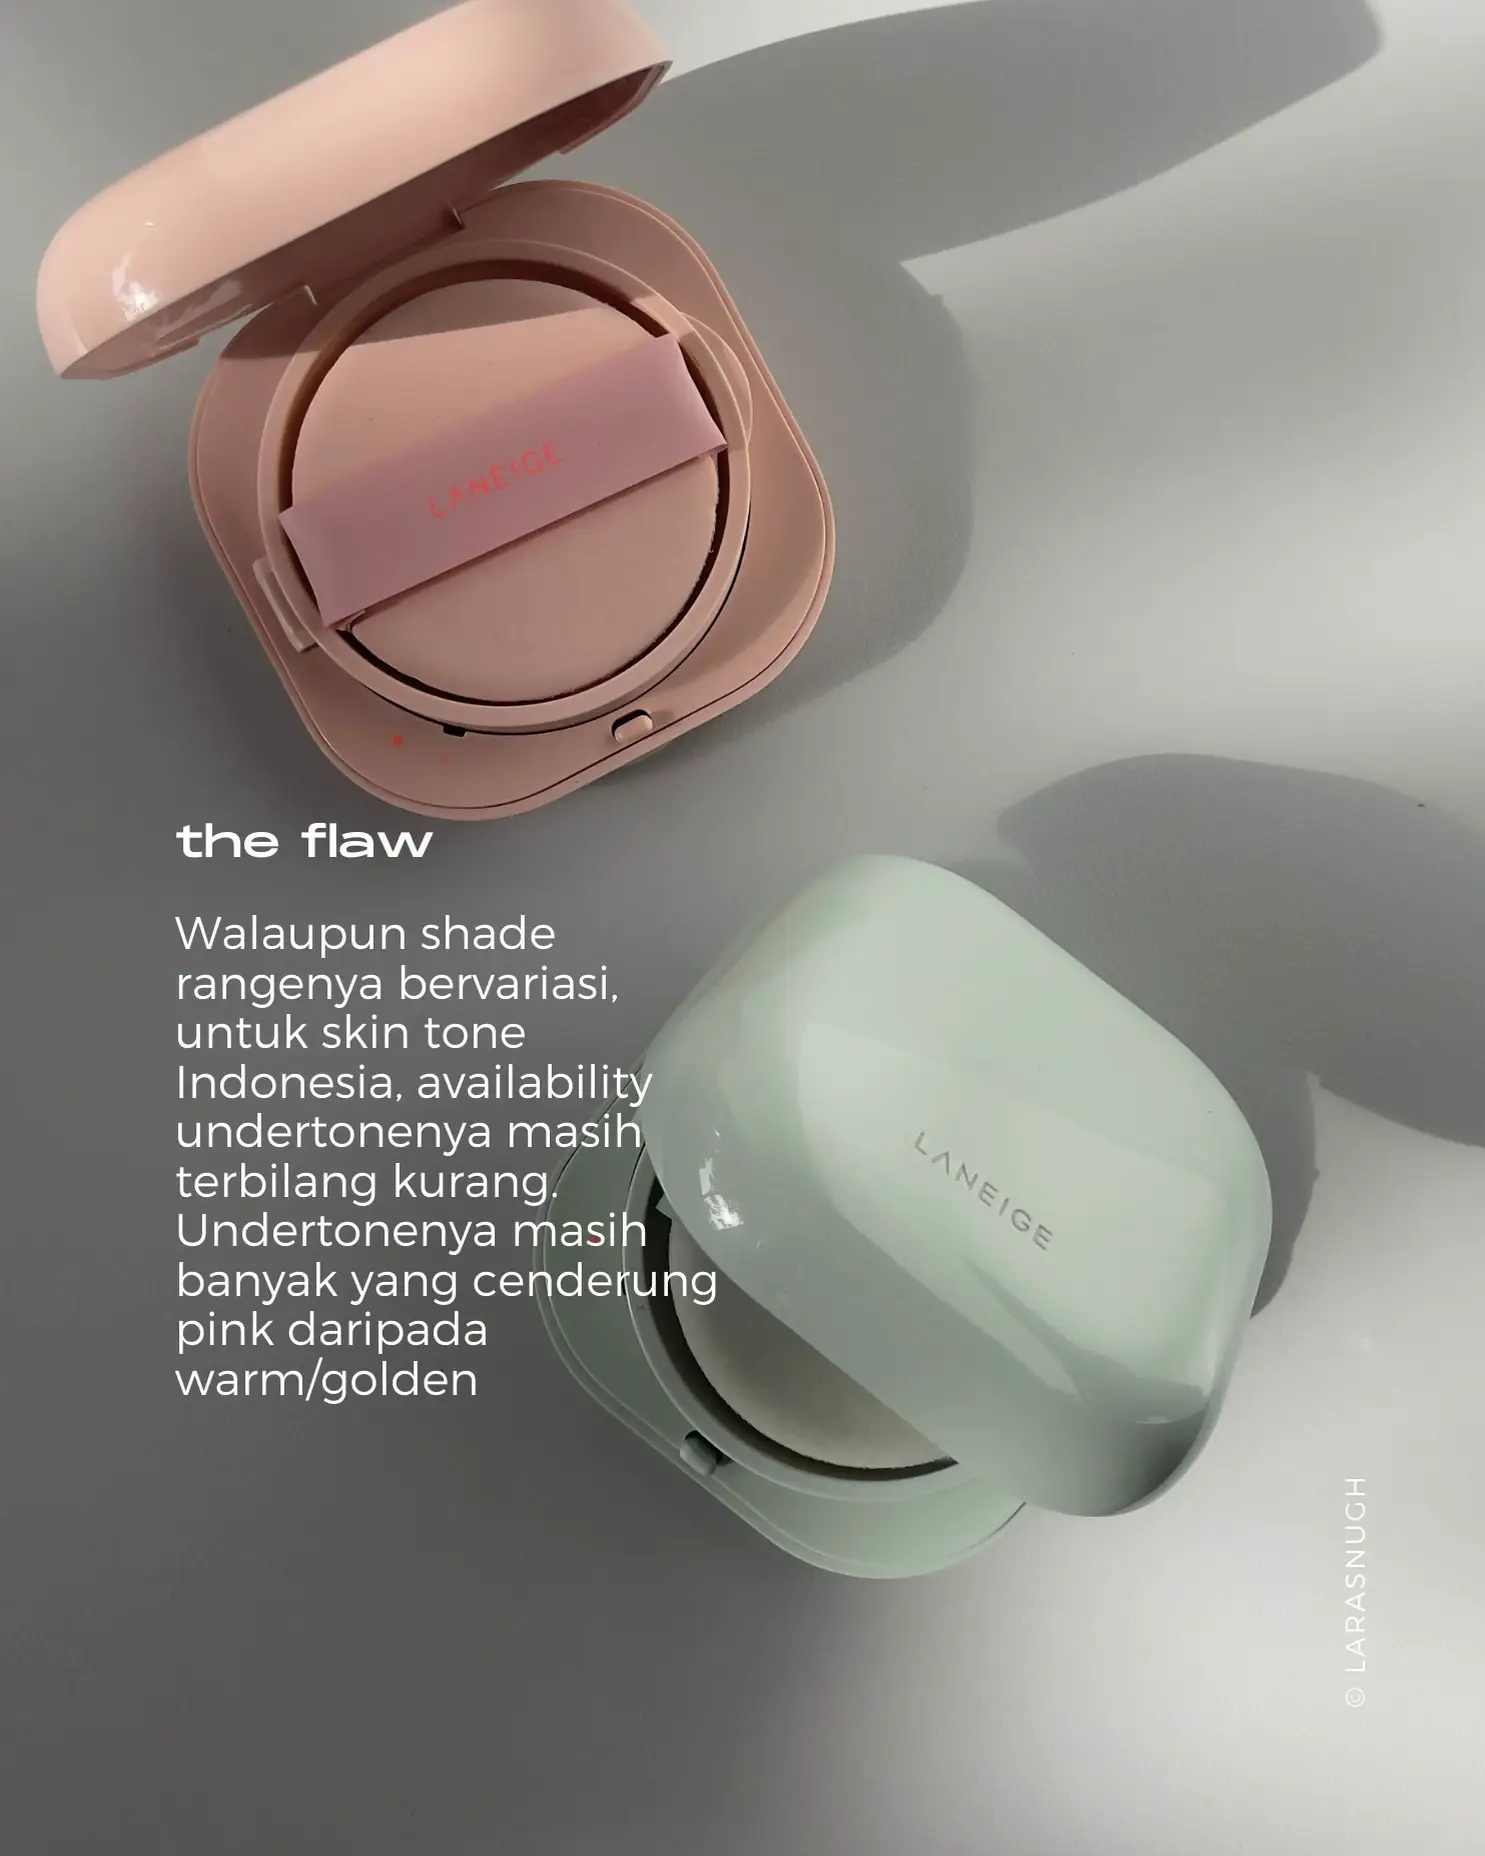 Laneige Neo Cushion Matte (All New) Review – BBlog